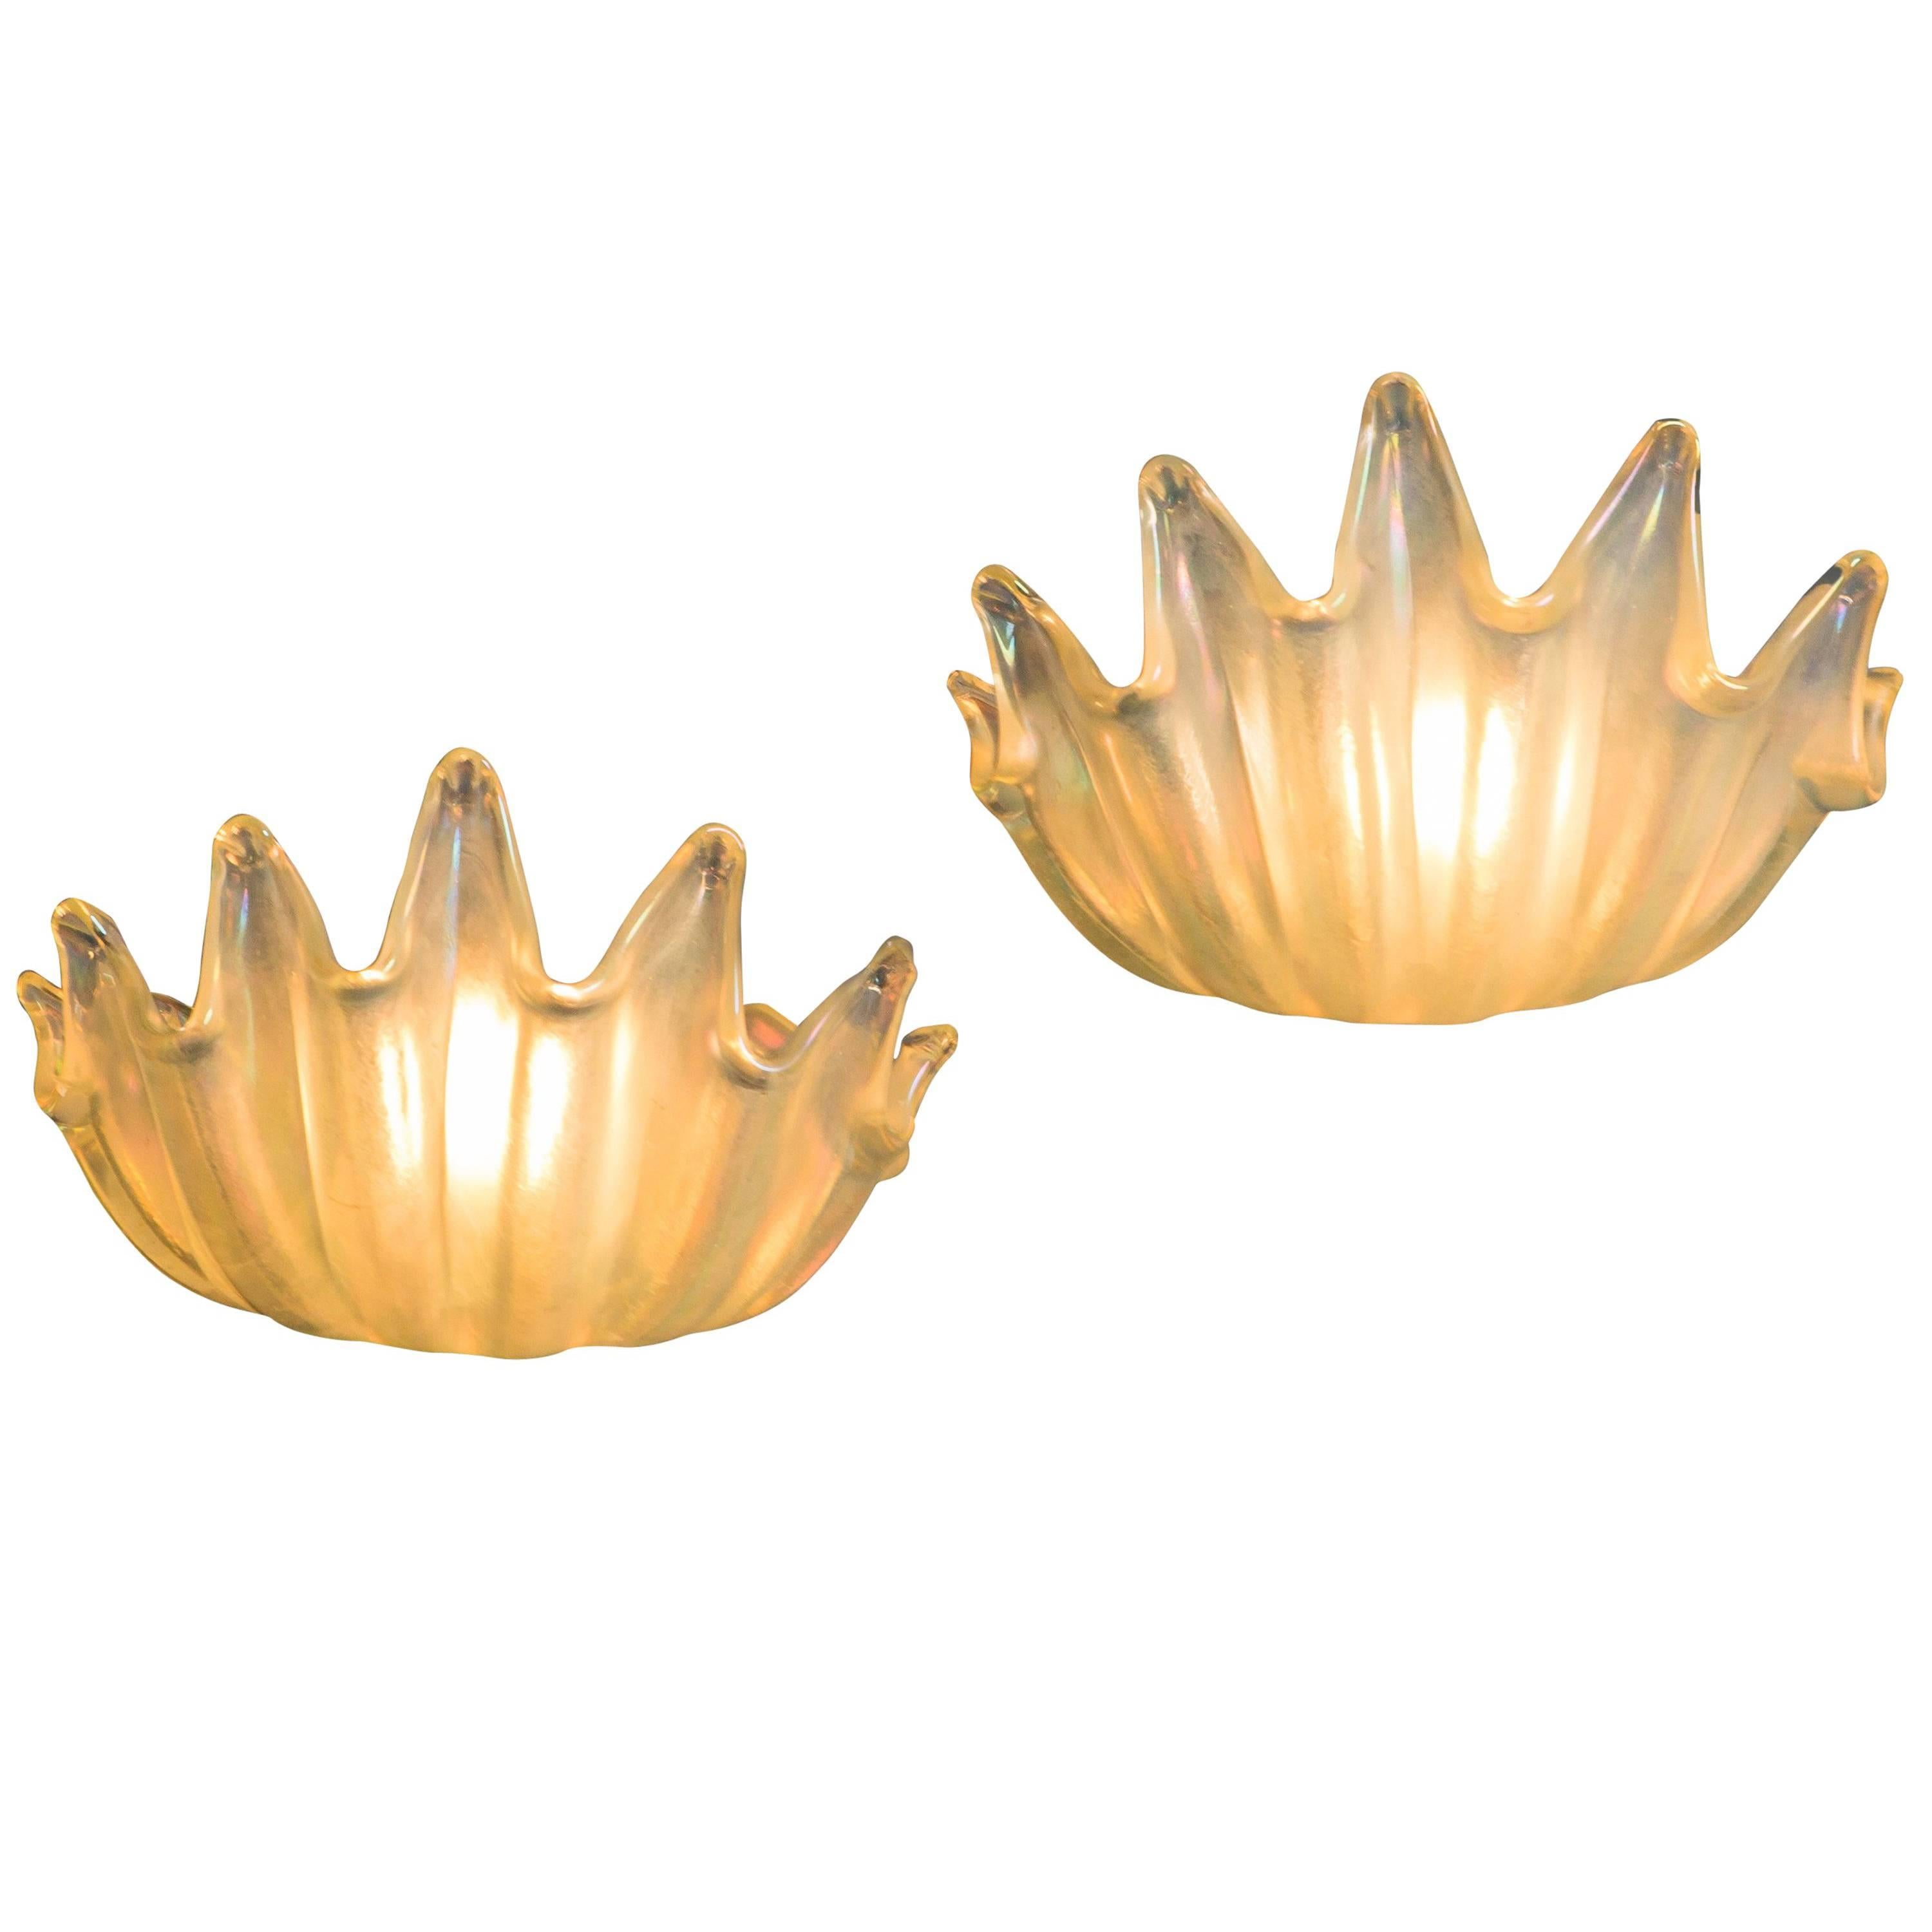 Mid-20th Century Barovier & Toso Rare Pair of Clamshell Sconces